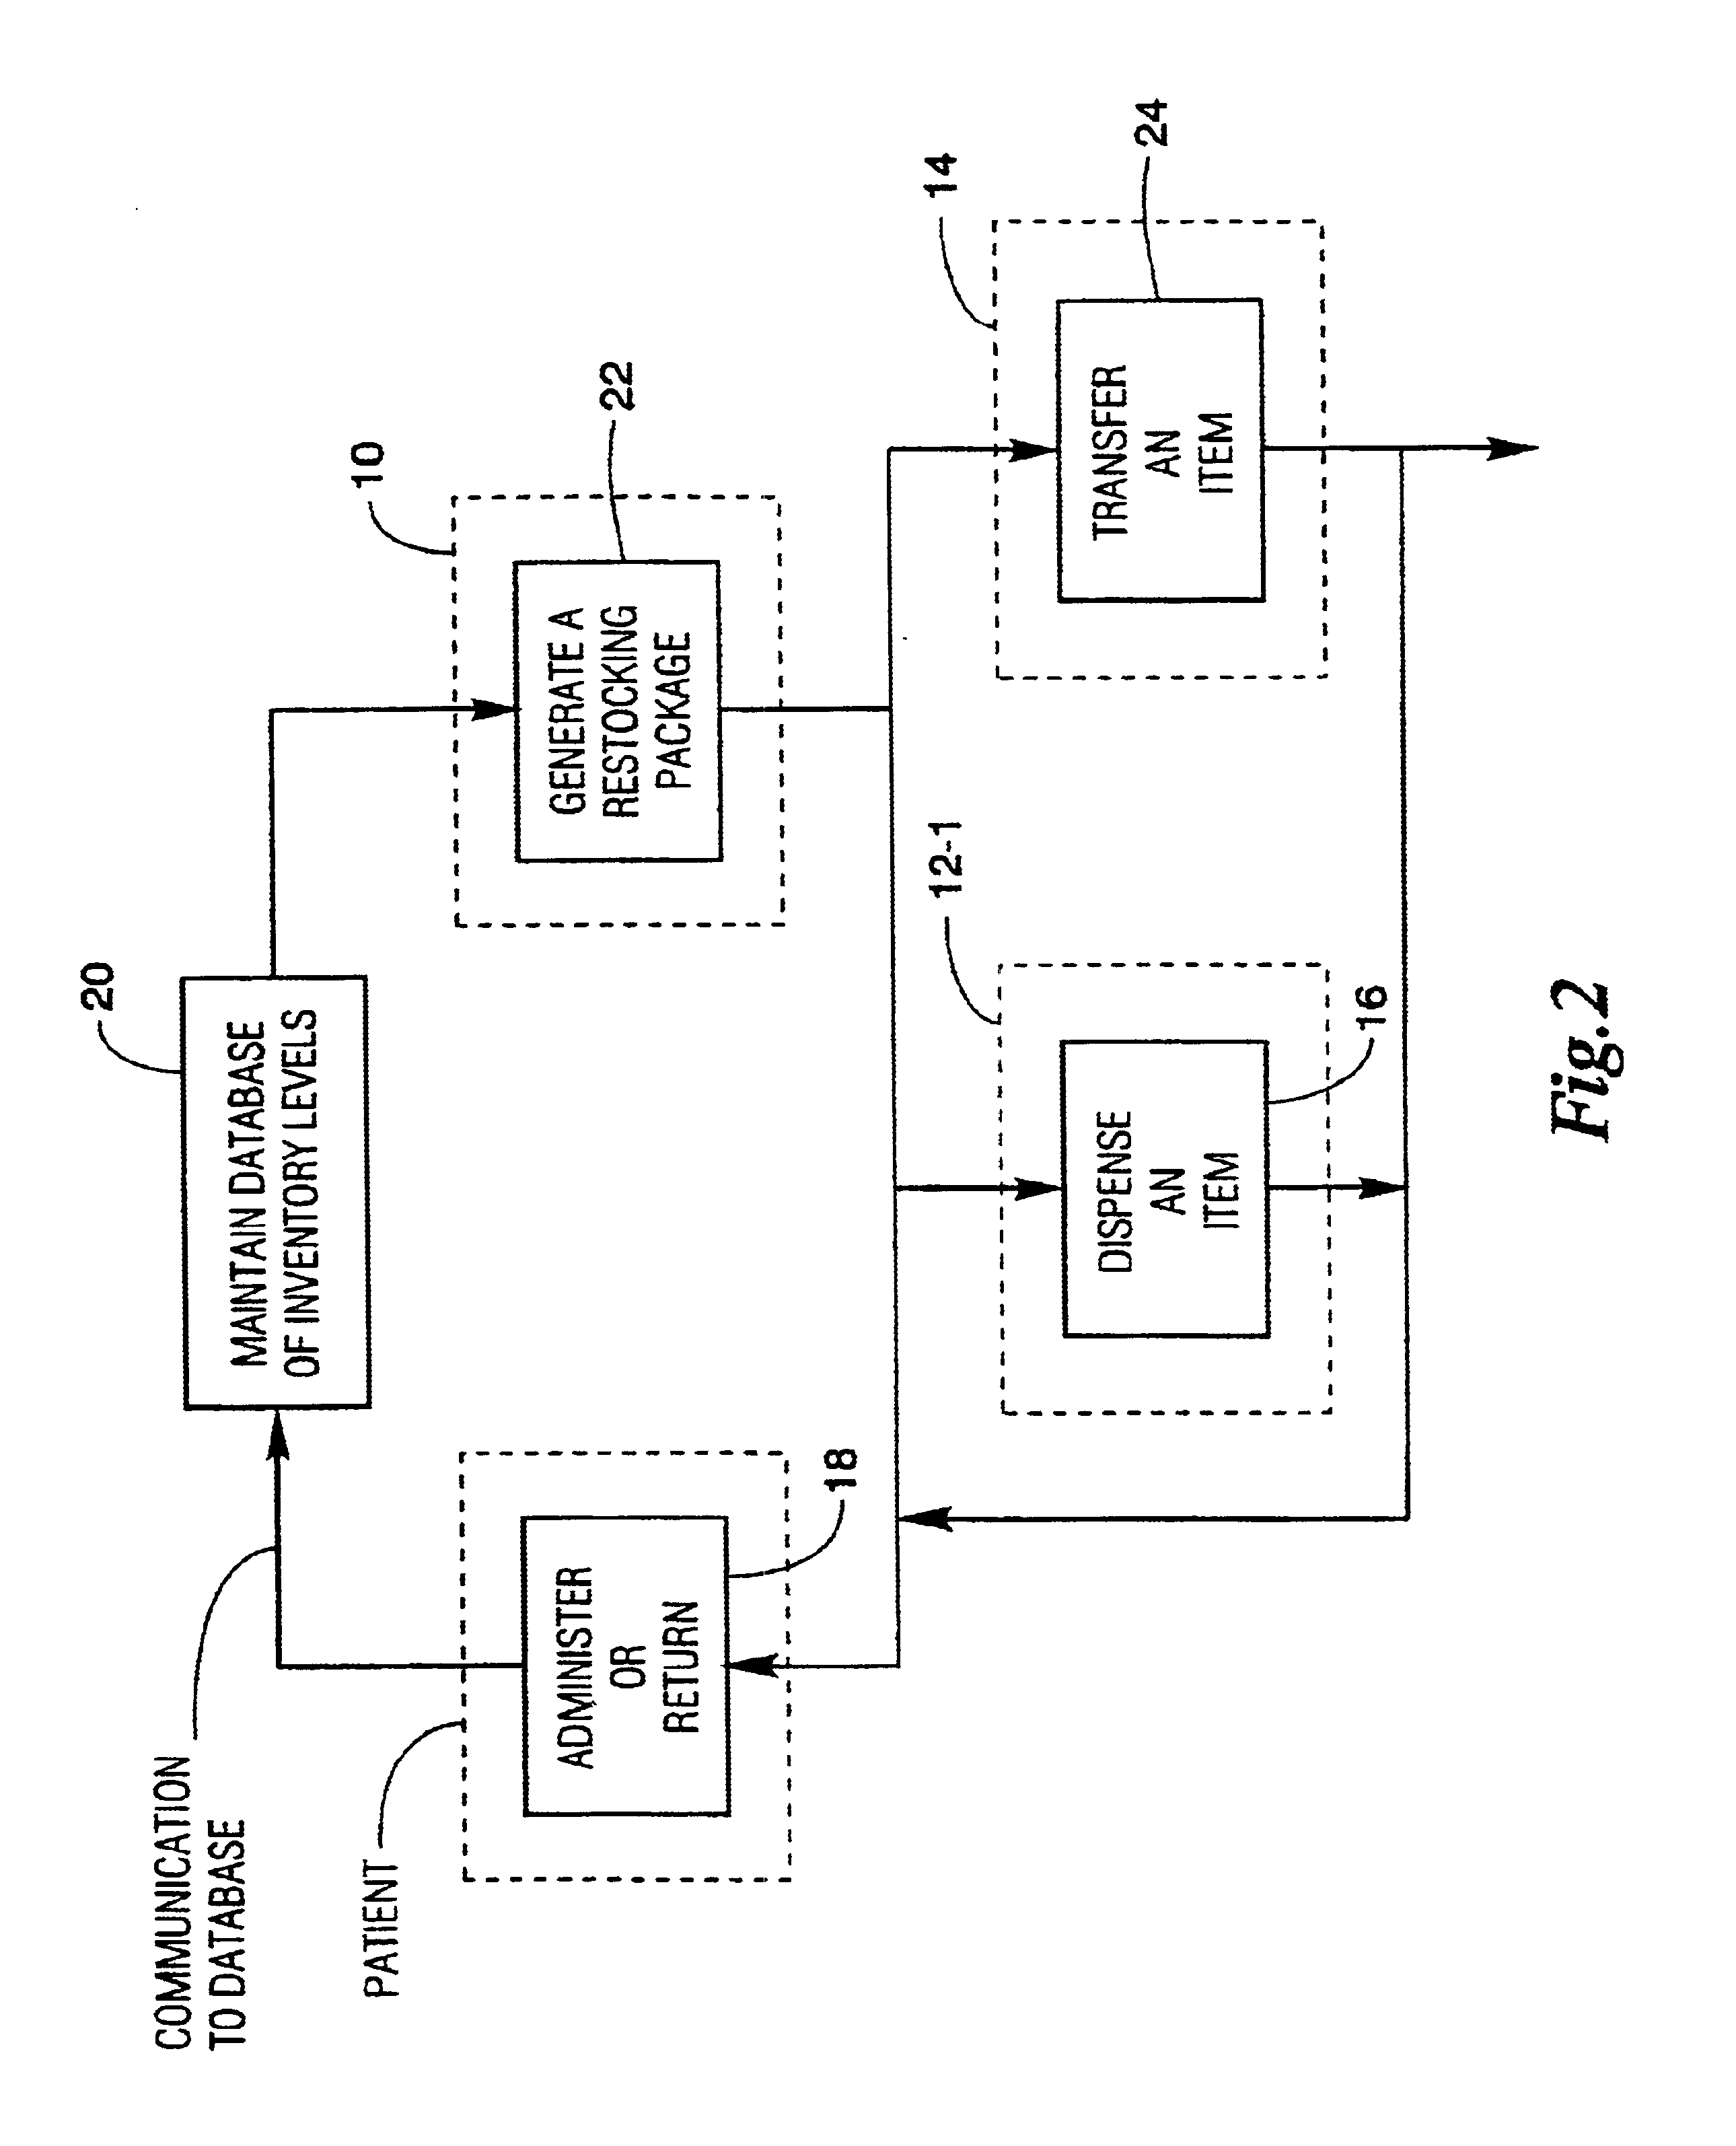 Carousel product for use in integrated restocking and dispensing system